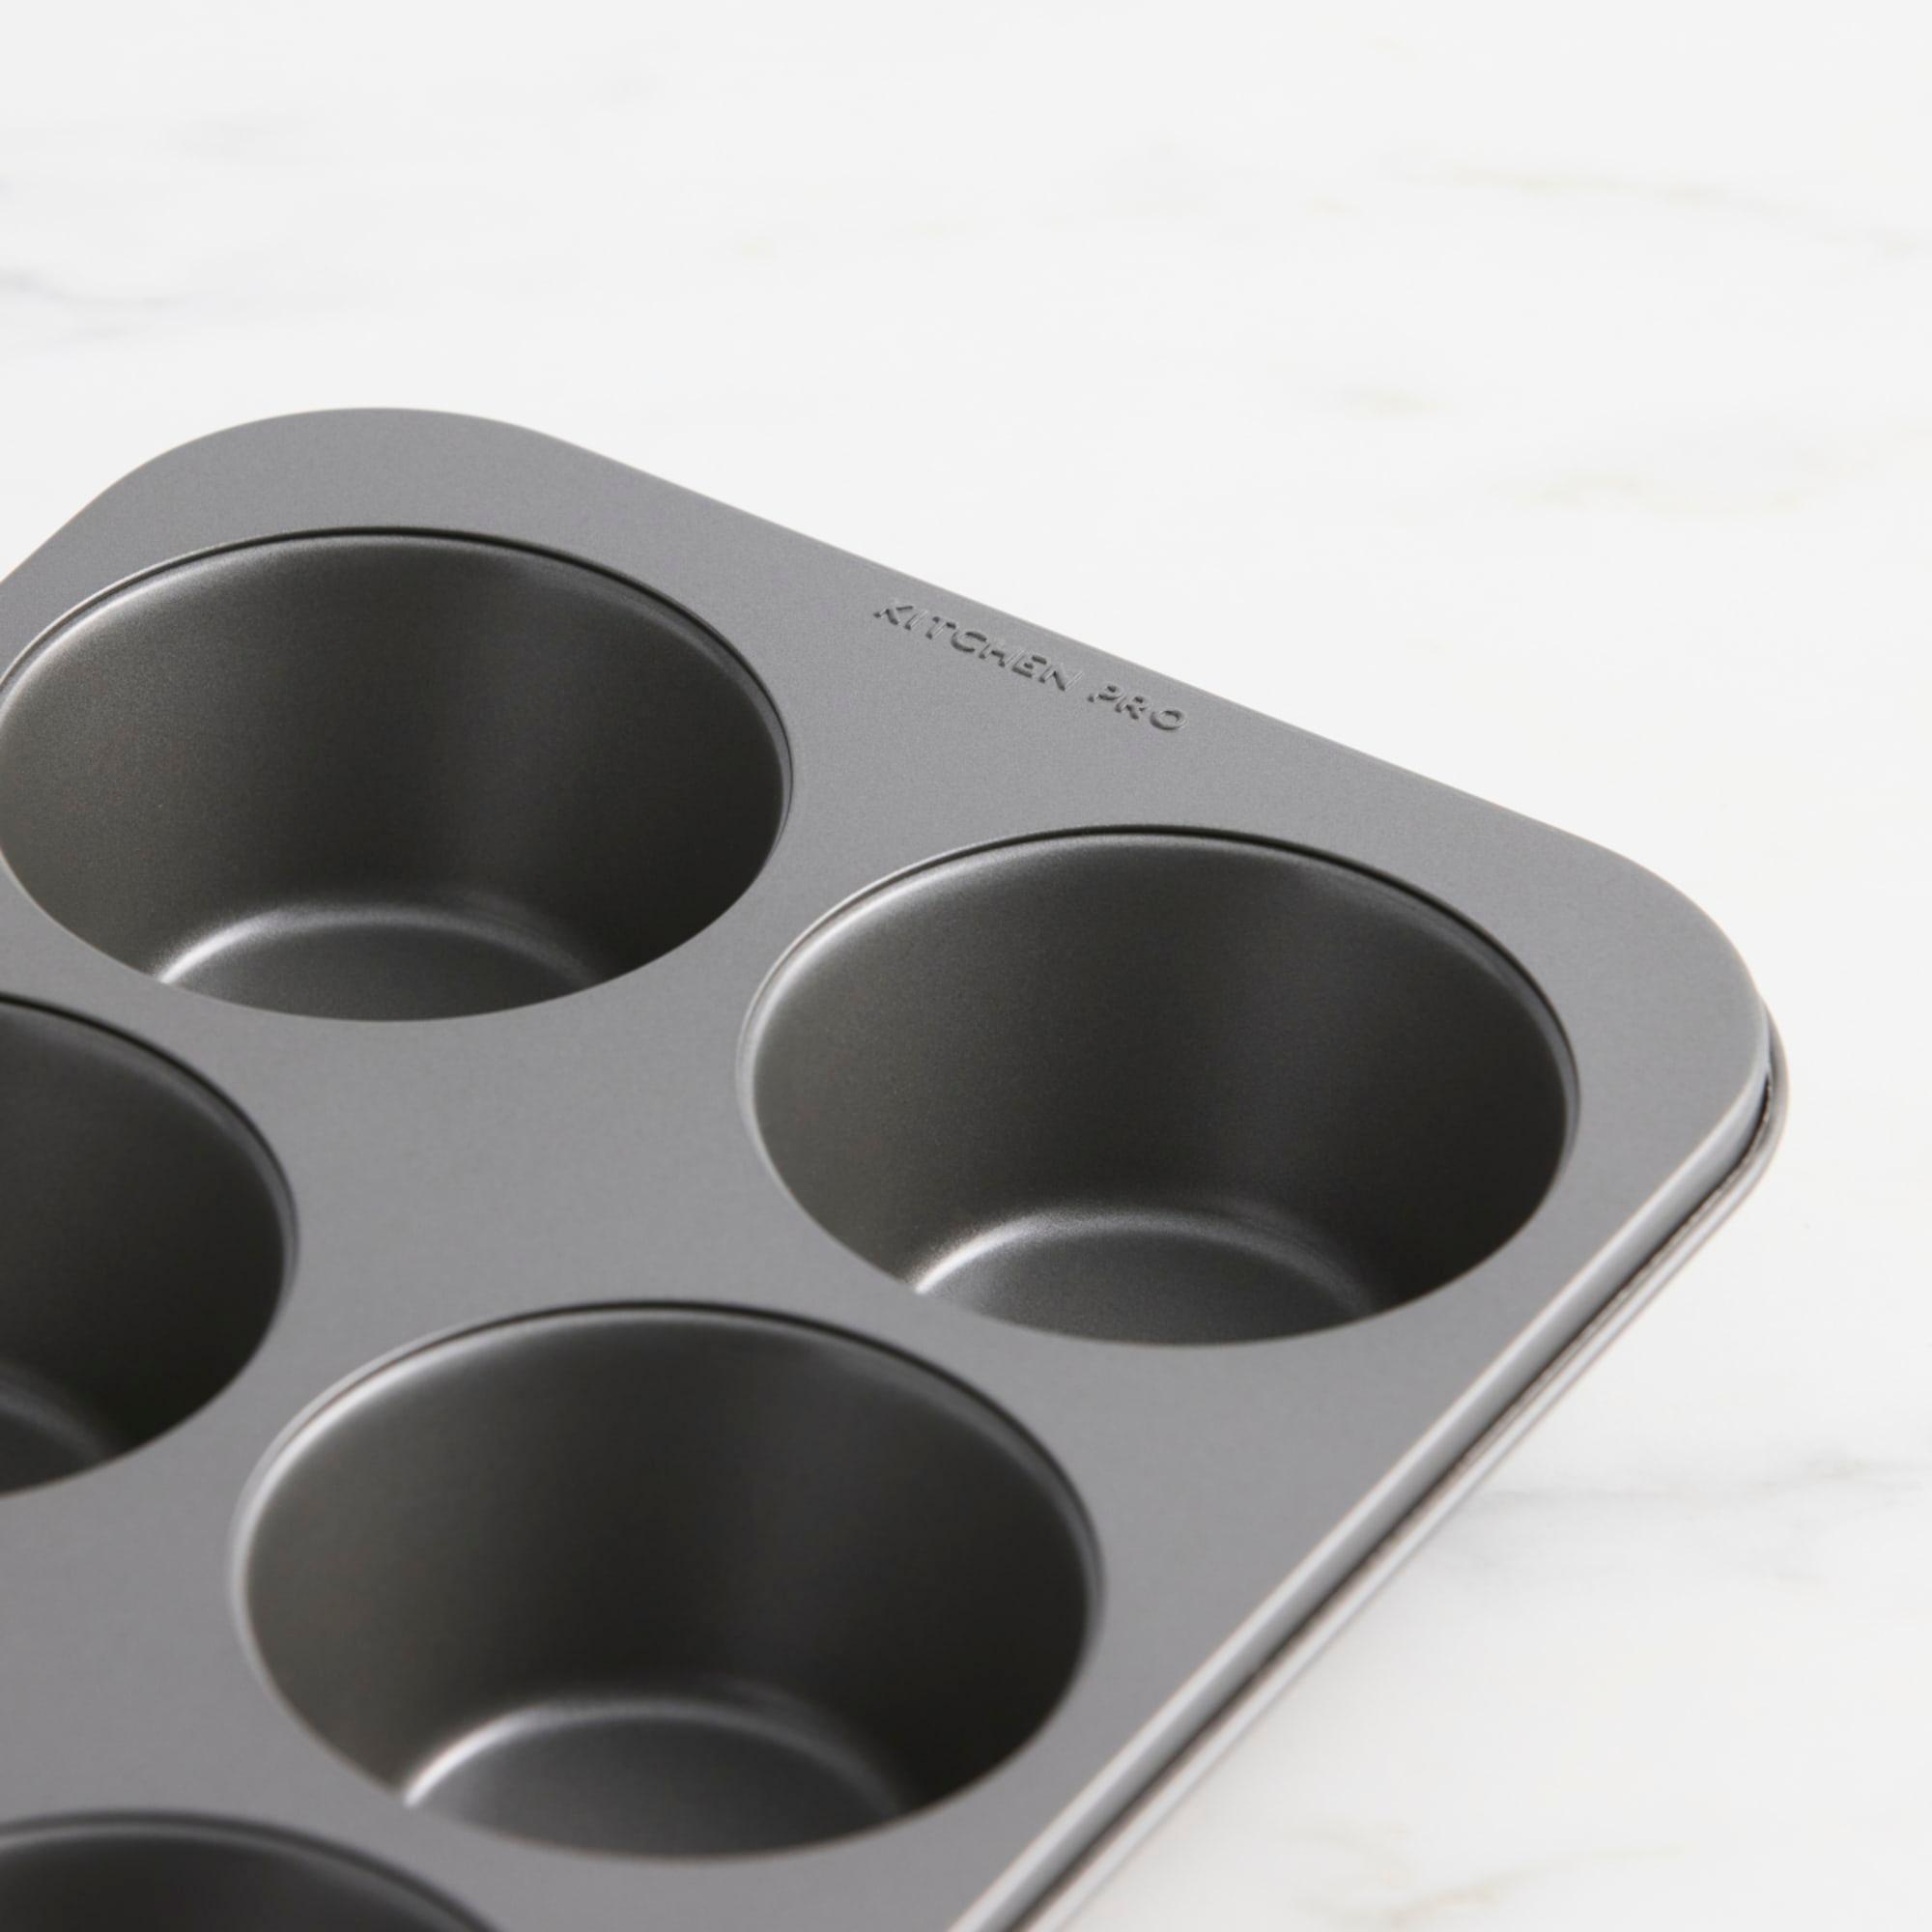 Kitchen Pro Bakewell Texas Muffin Pan 6 Cup Image 4